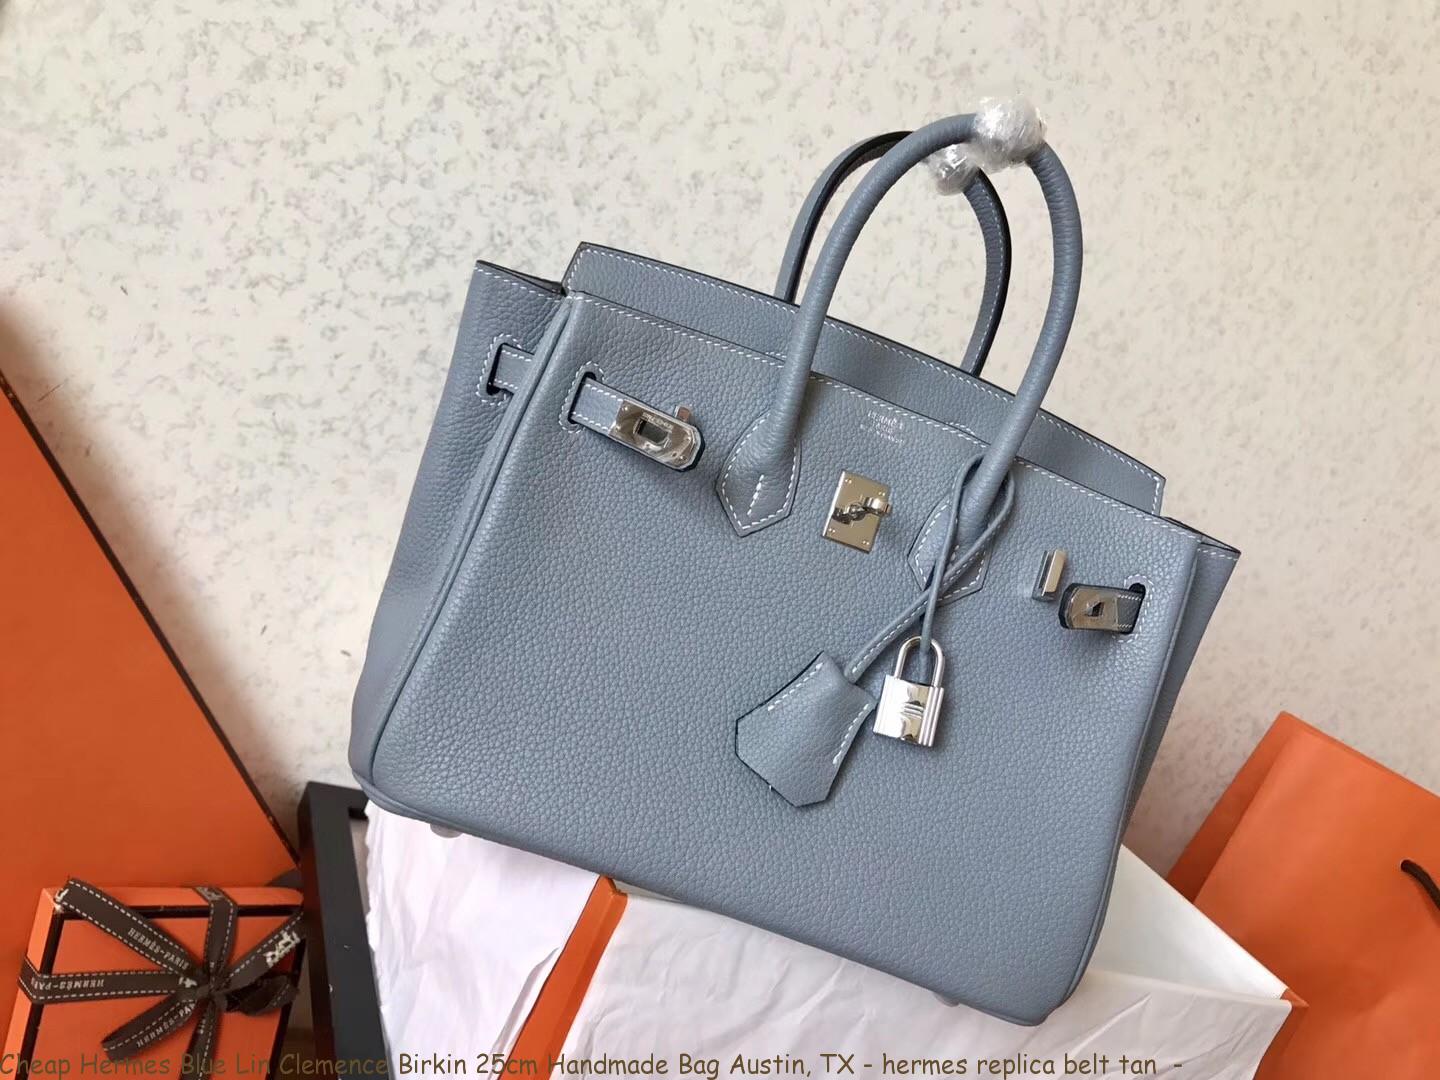 Hermes Inspired Bags | IQS Executive